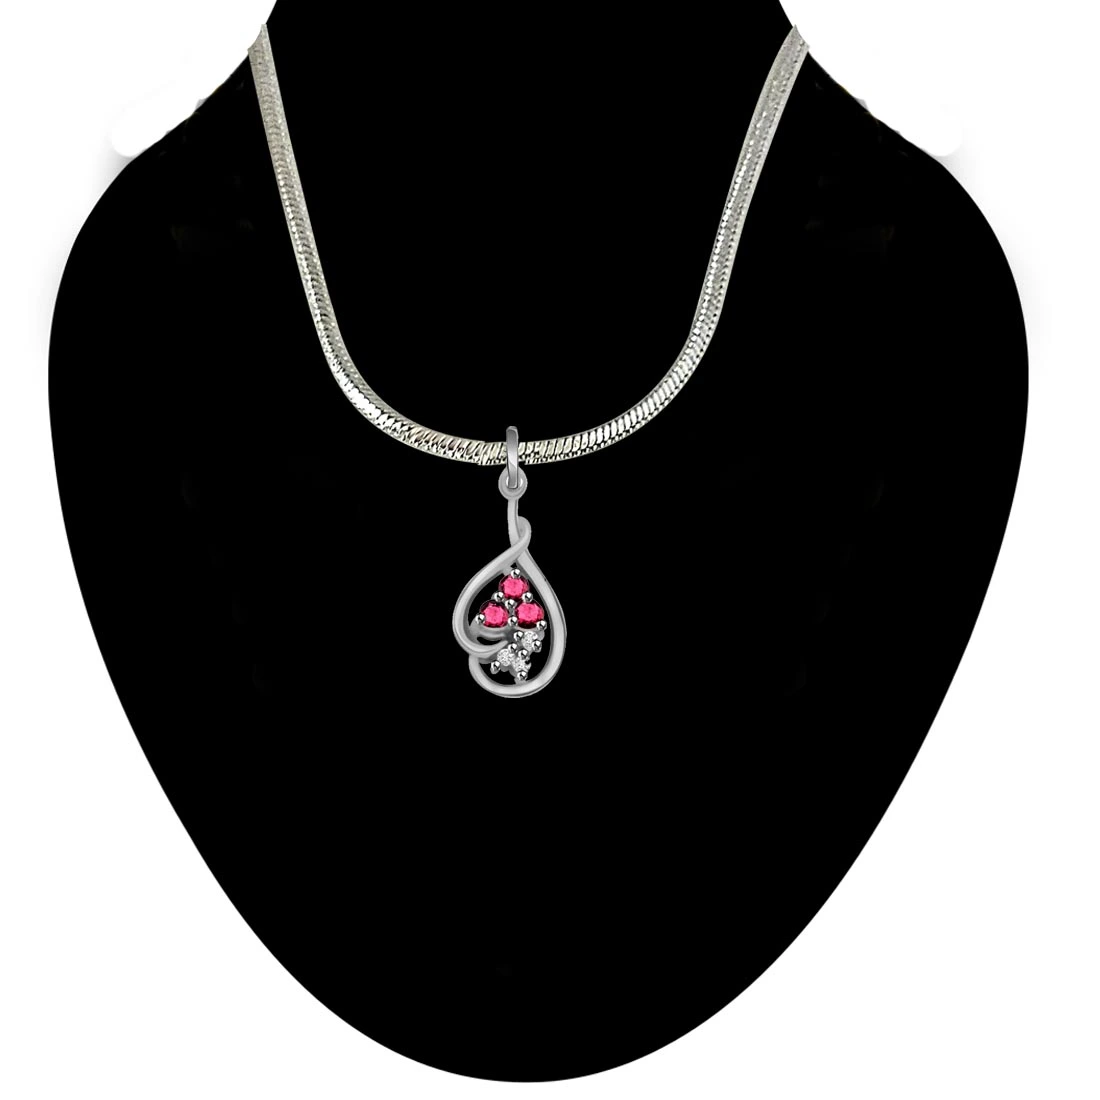 Trinking Love - Real Diamond, Red Ruby & Sterling Silver Pendant with 18 IN Chain (SDP173)